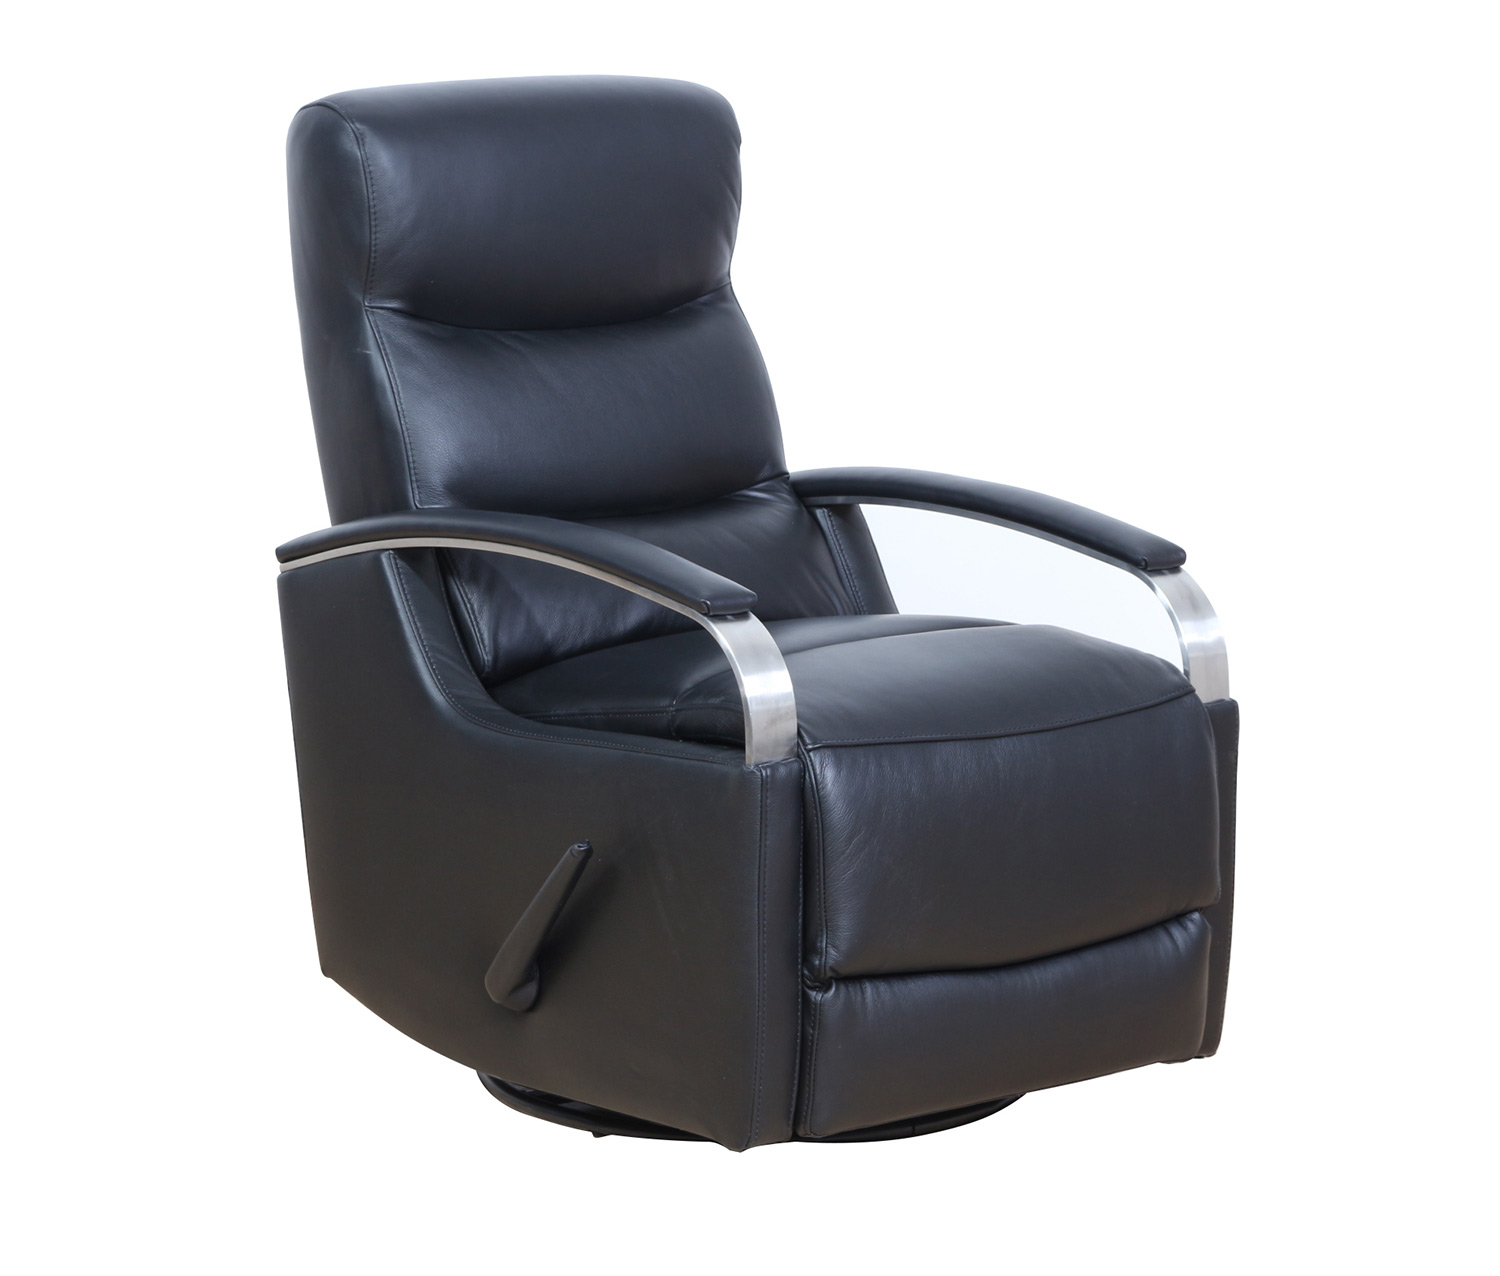 Barcalounger Shadow Swivel Glider Recliner Chair - Apollo Onyx/Leather Match